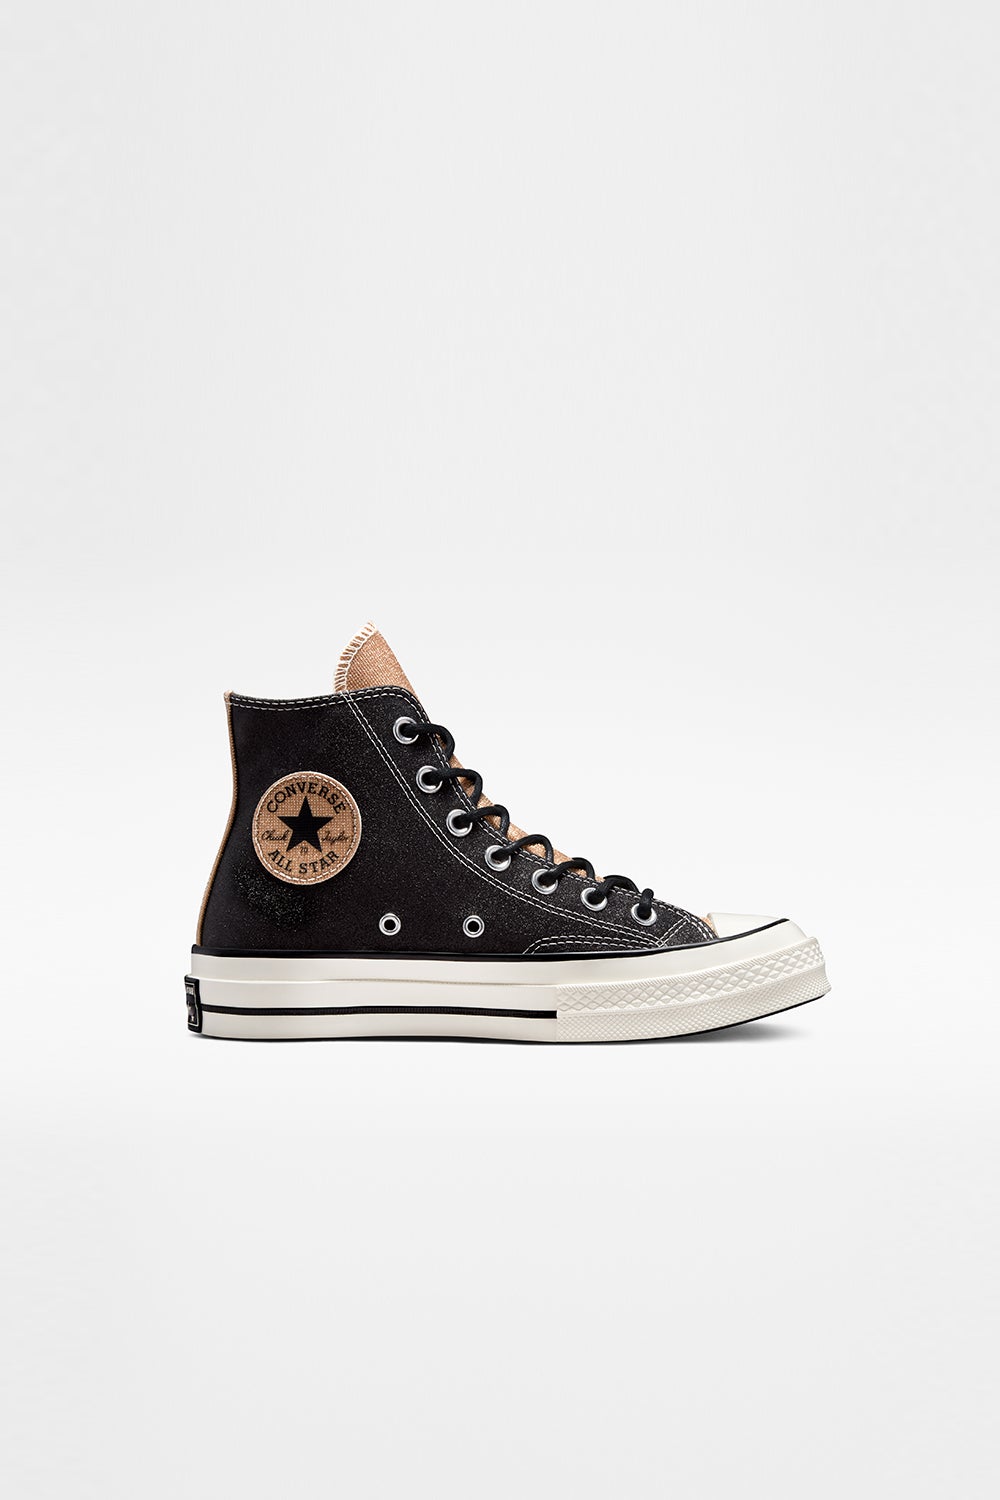 Converse Chuck 70 Authentic Glam High Top Black